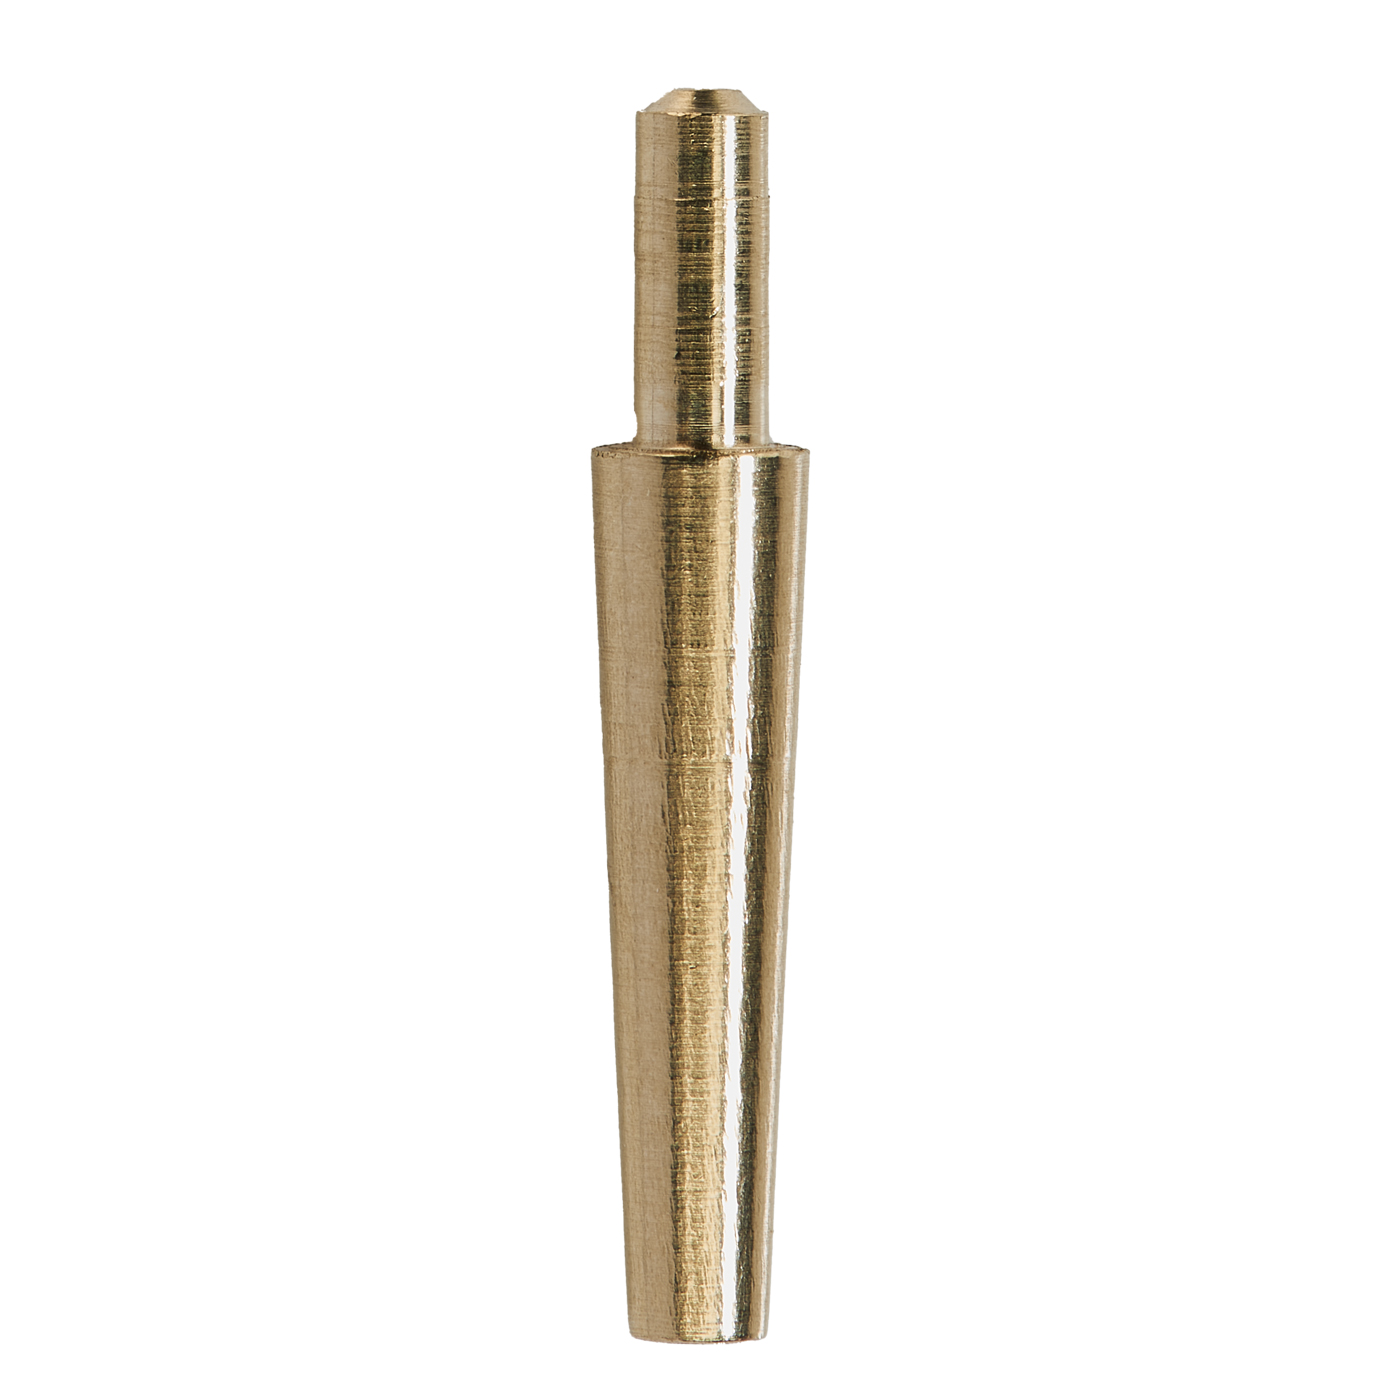 Dowel Pins with Spike (Brass) - MATERIAL - DOWEL PINS - -SONG